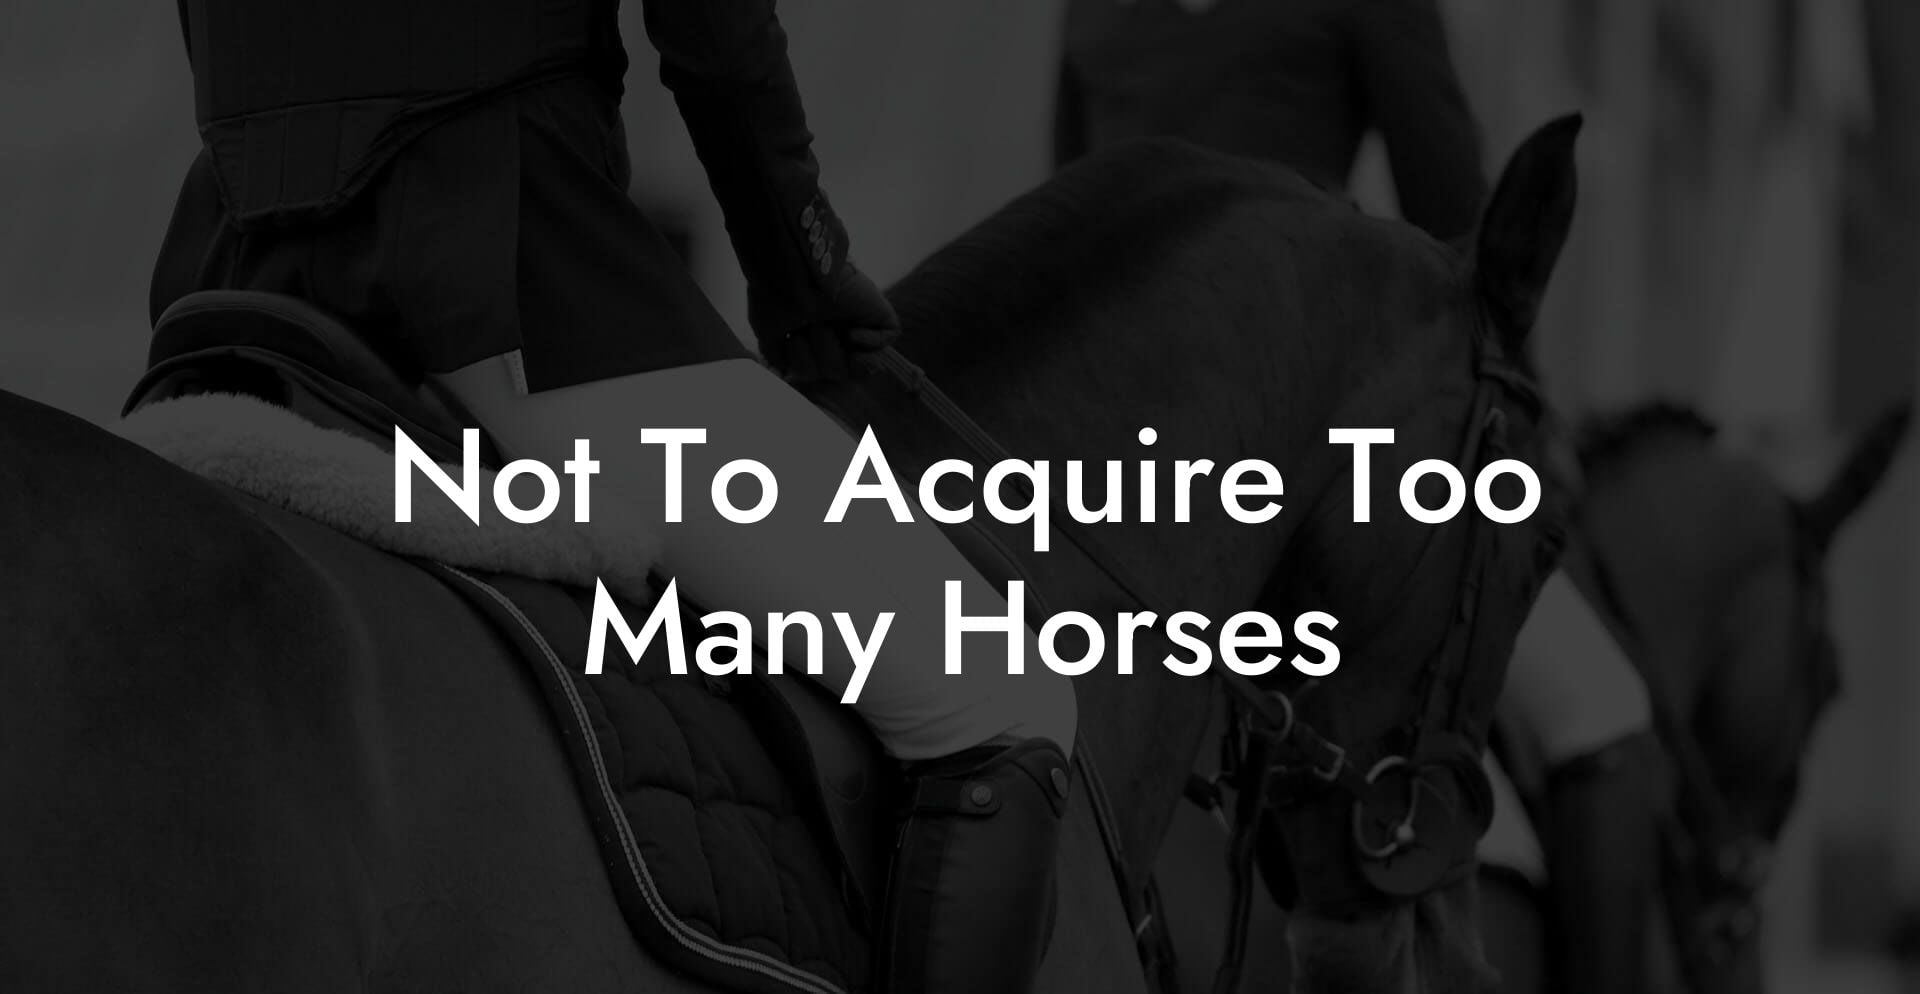 Not To Acquire Too Many Horses